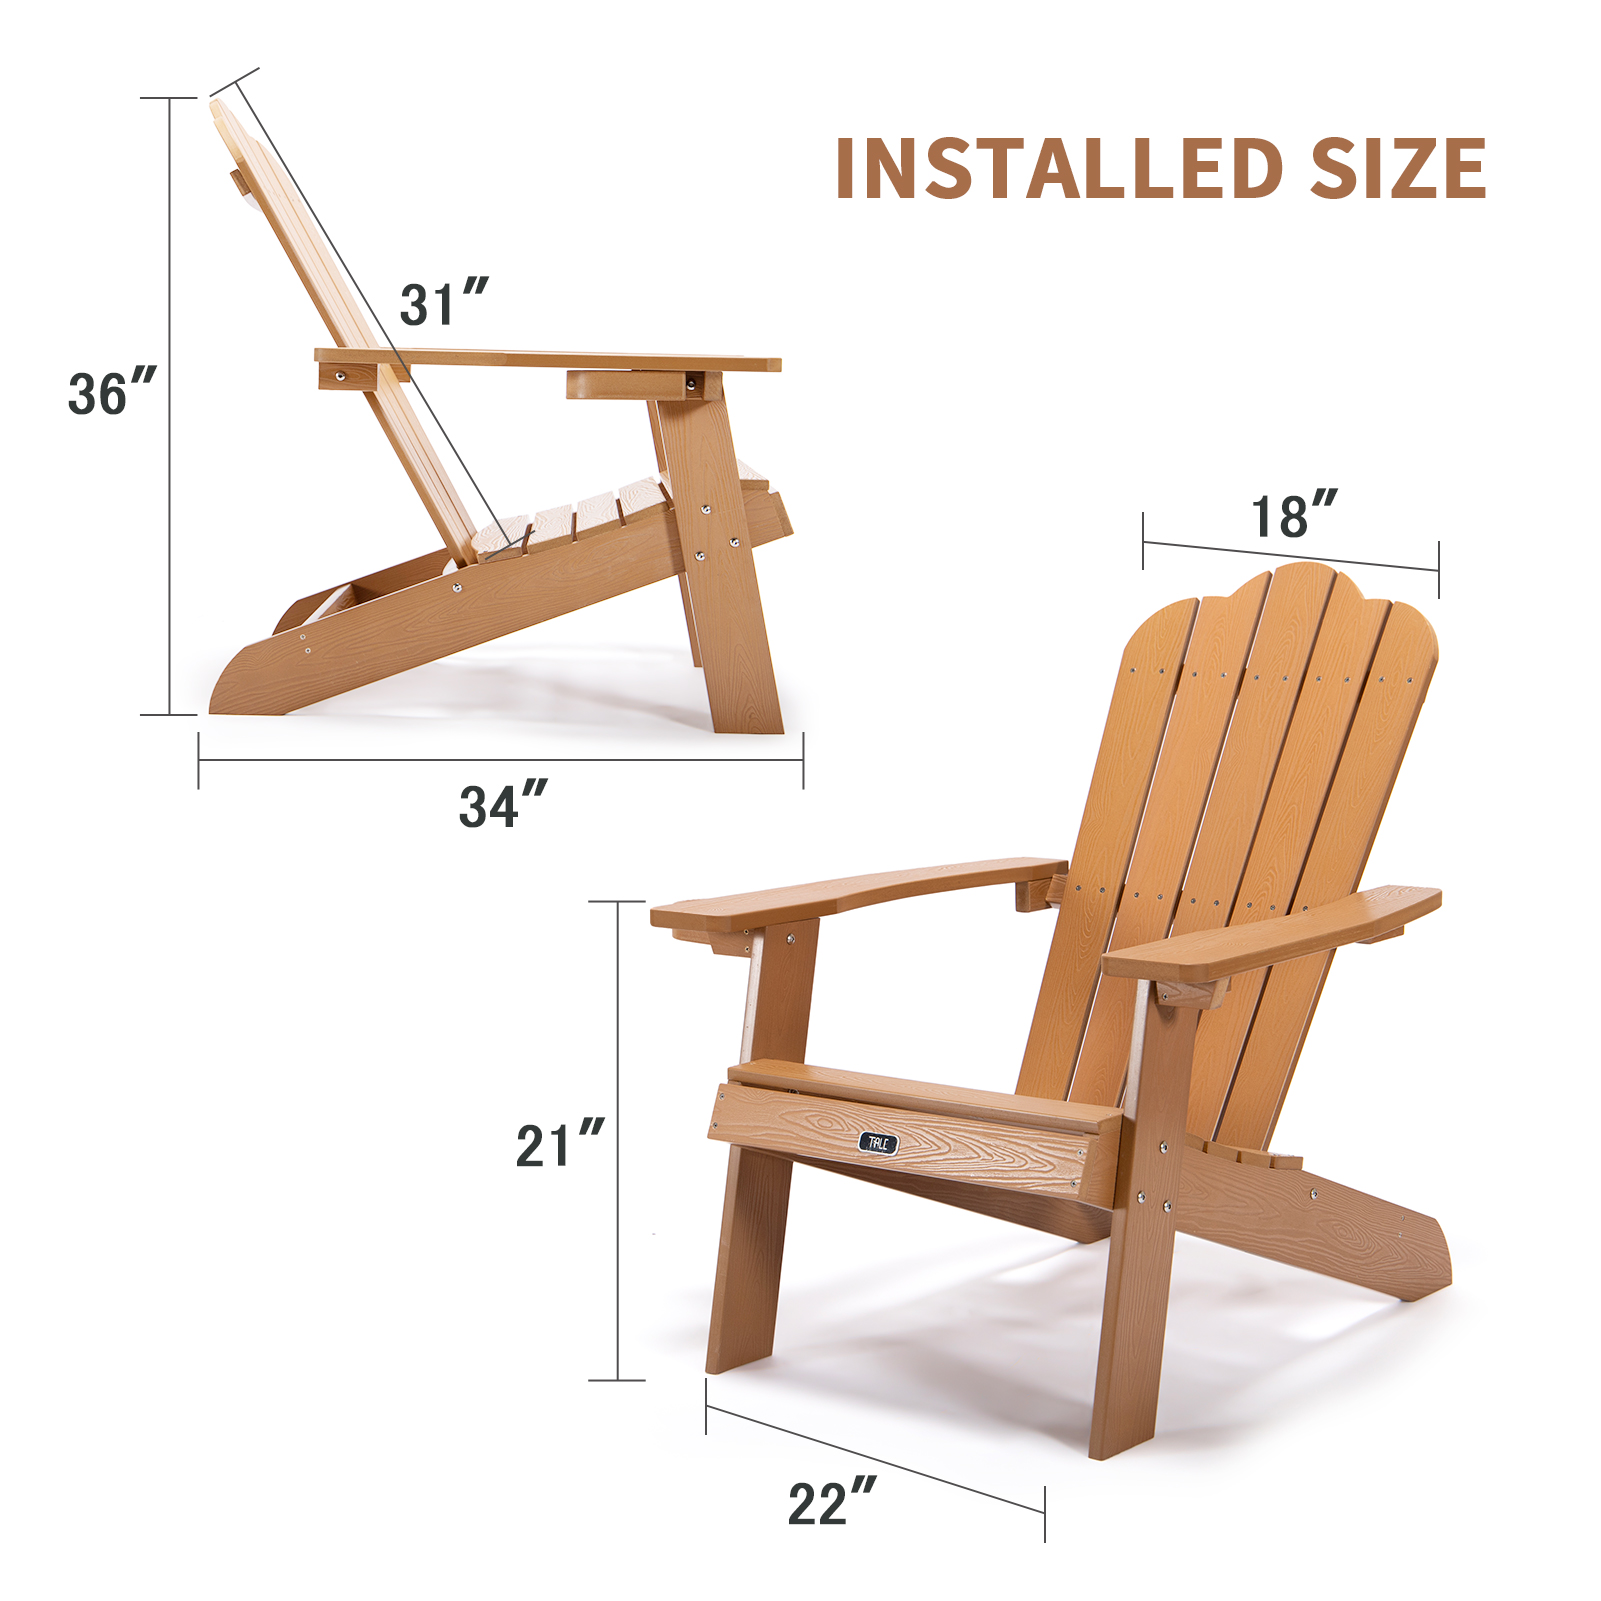 Folding Adirondack Chair, Plastic Wooden Lounge Chairs for Yard, Garden, Patio - image 5 of 7